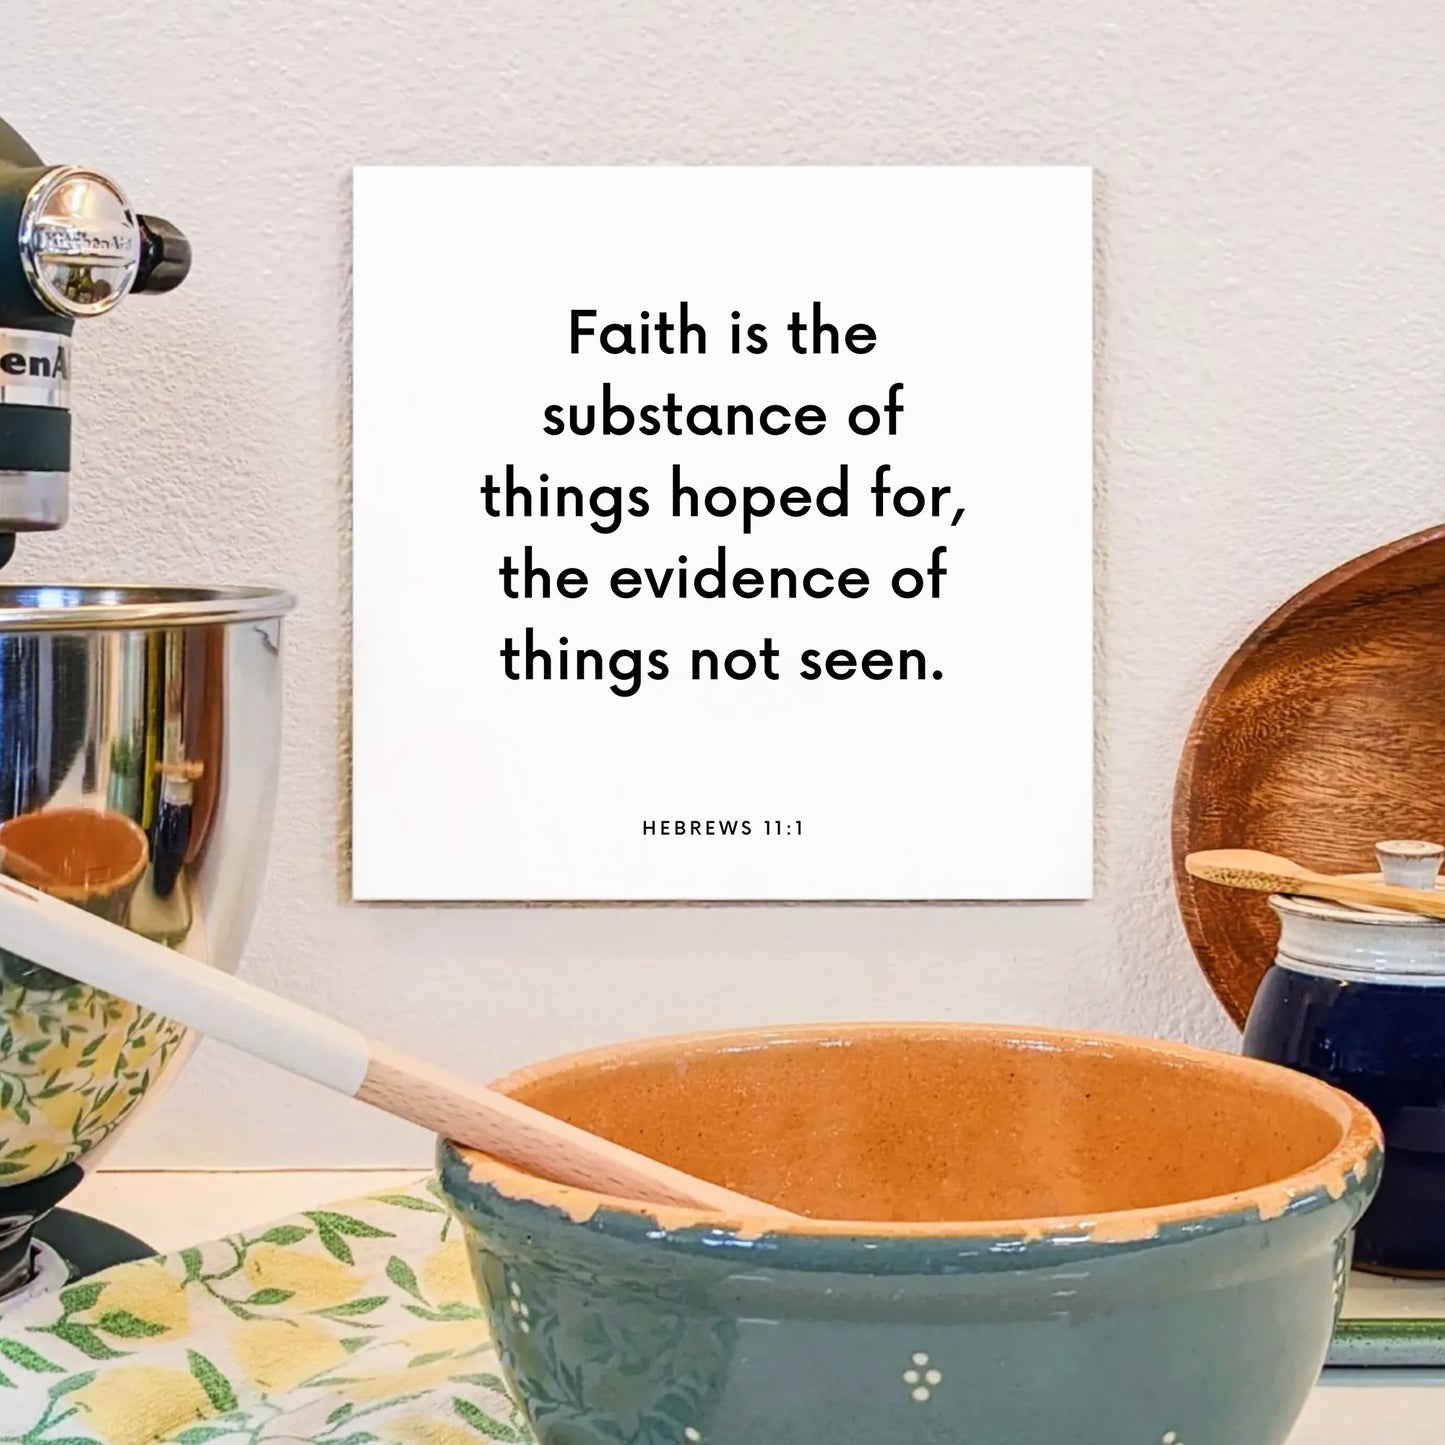 Kitchen mouting of the scripture tile for Hebrews 11:1 - "Faith is the substance of things hoped for"